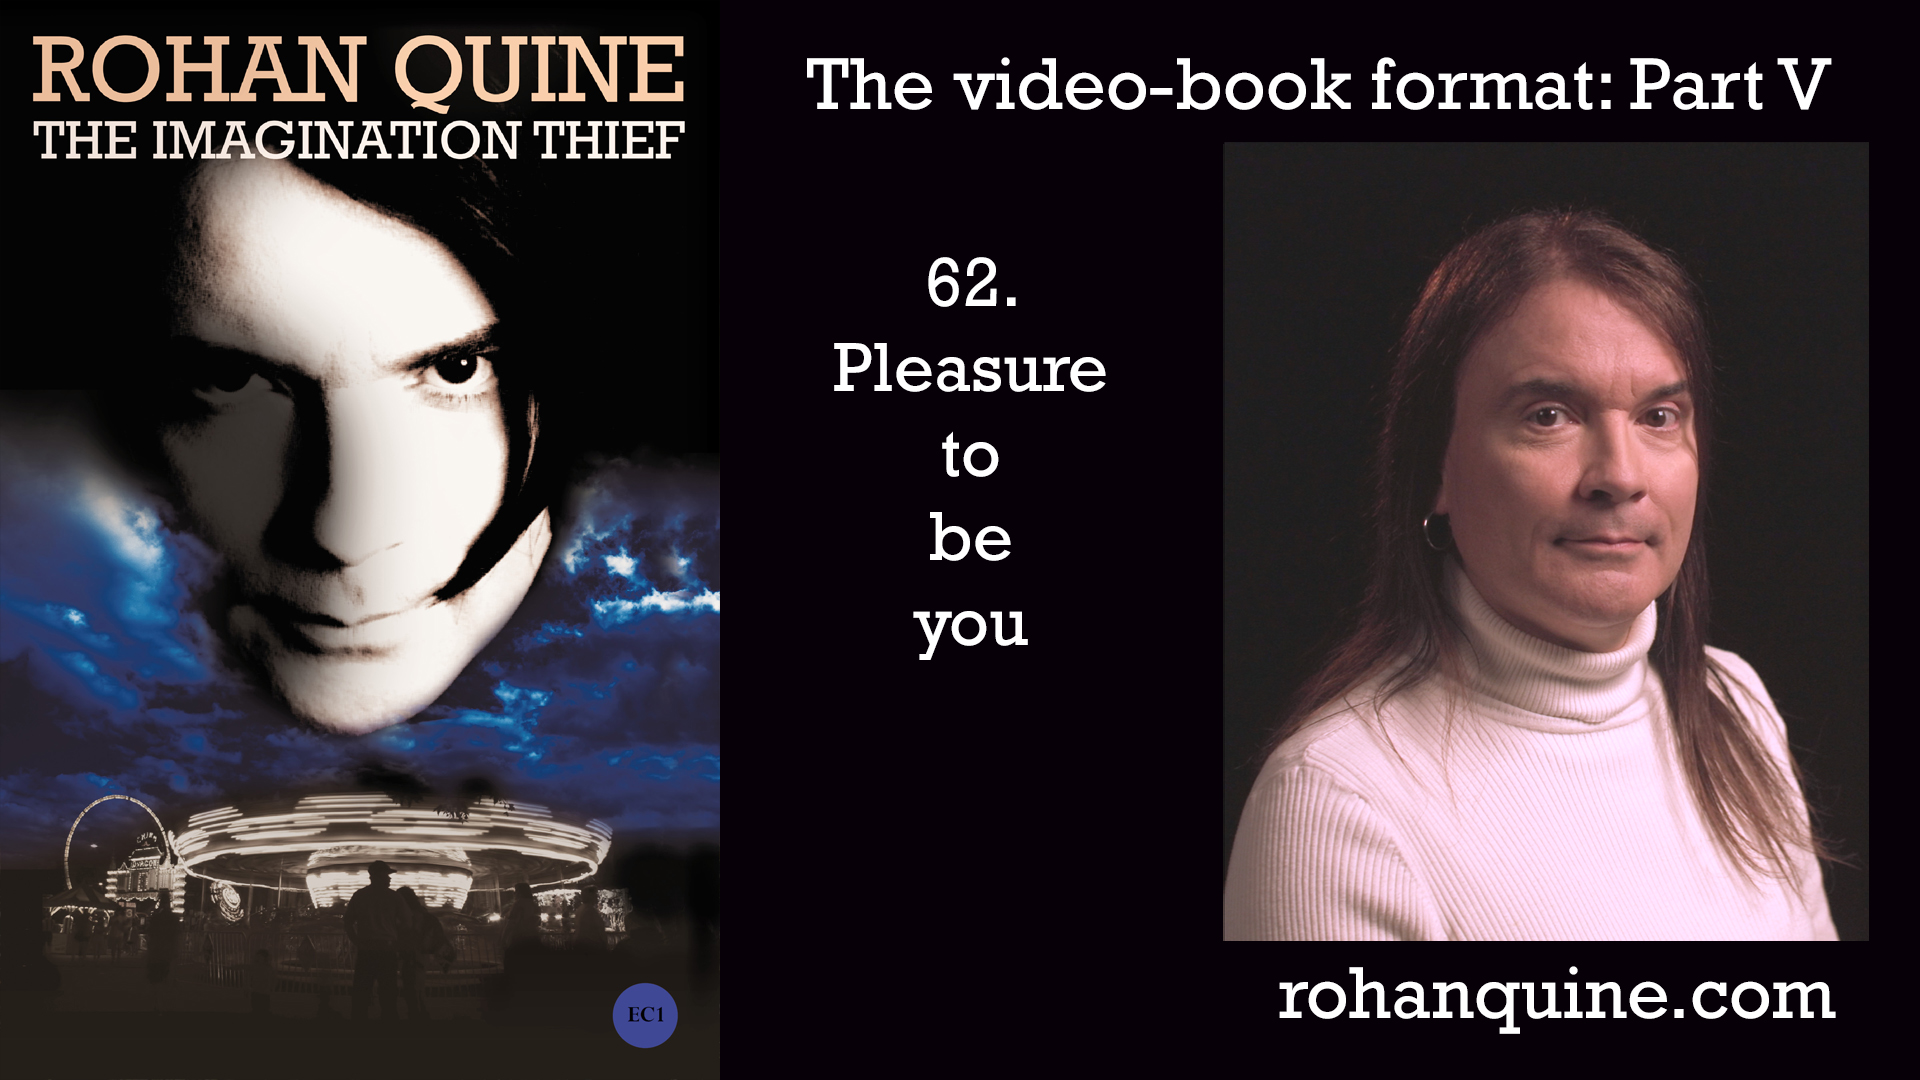 THE IMAGINATION THIEF by Rohan Quine - video-book format - mini-chapter 62